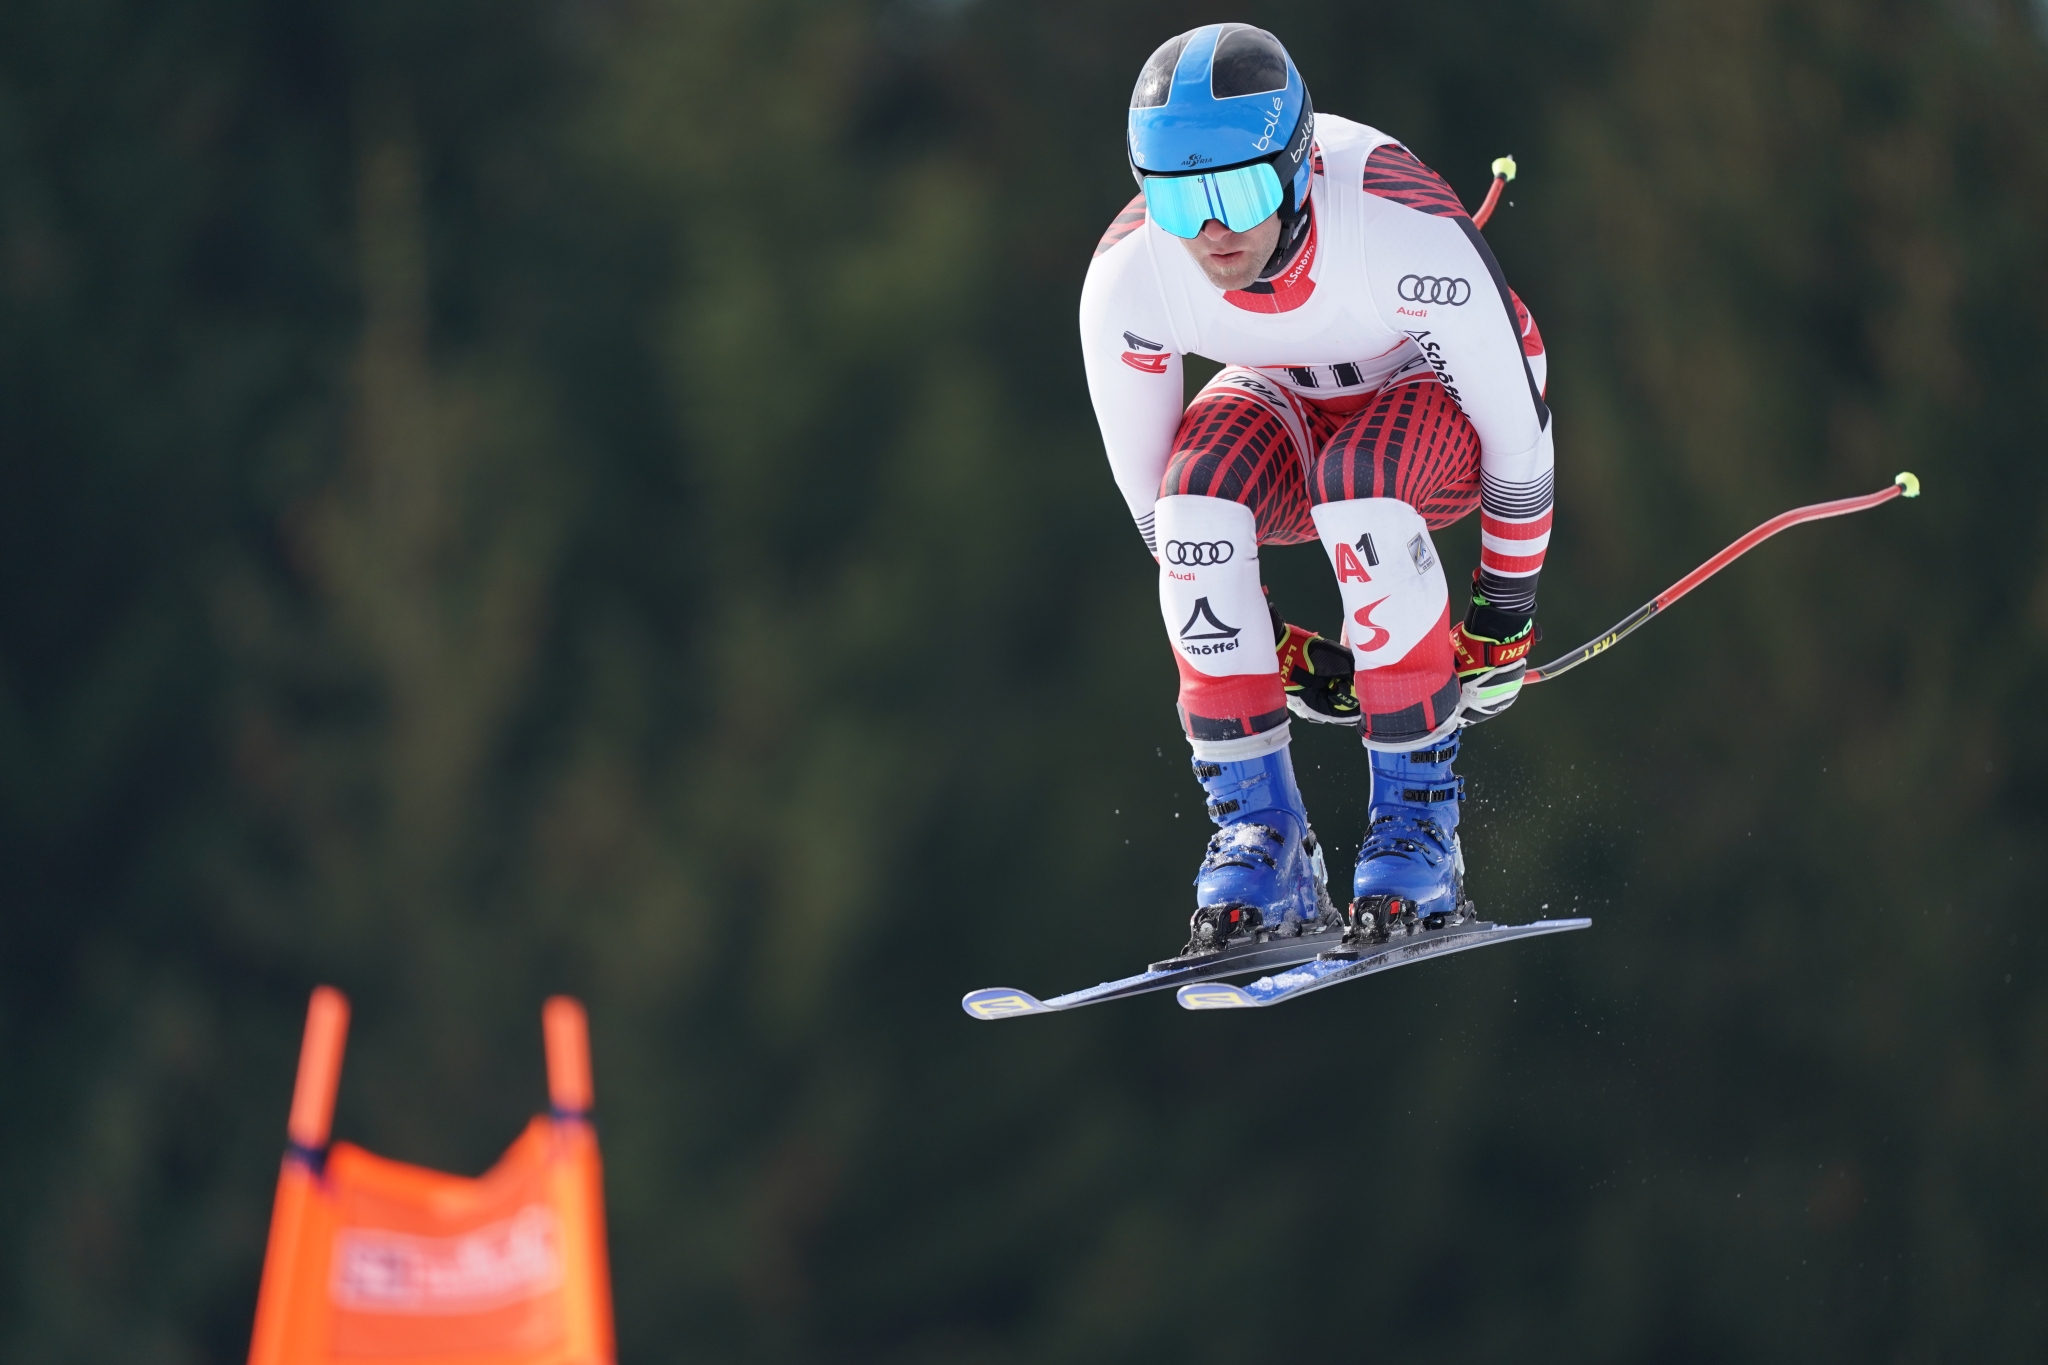 Skier in mid-air during a jump